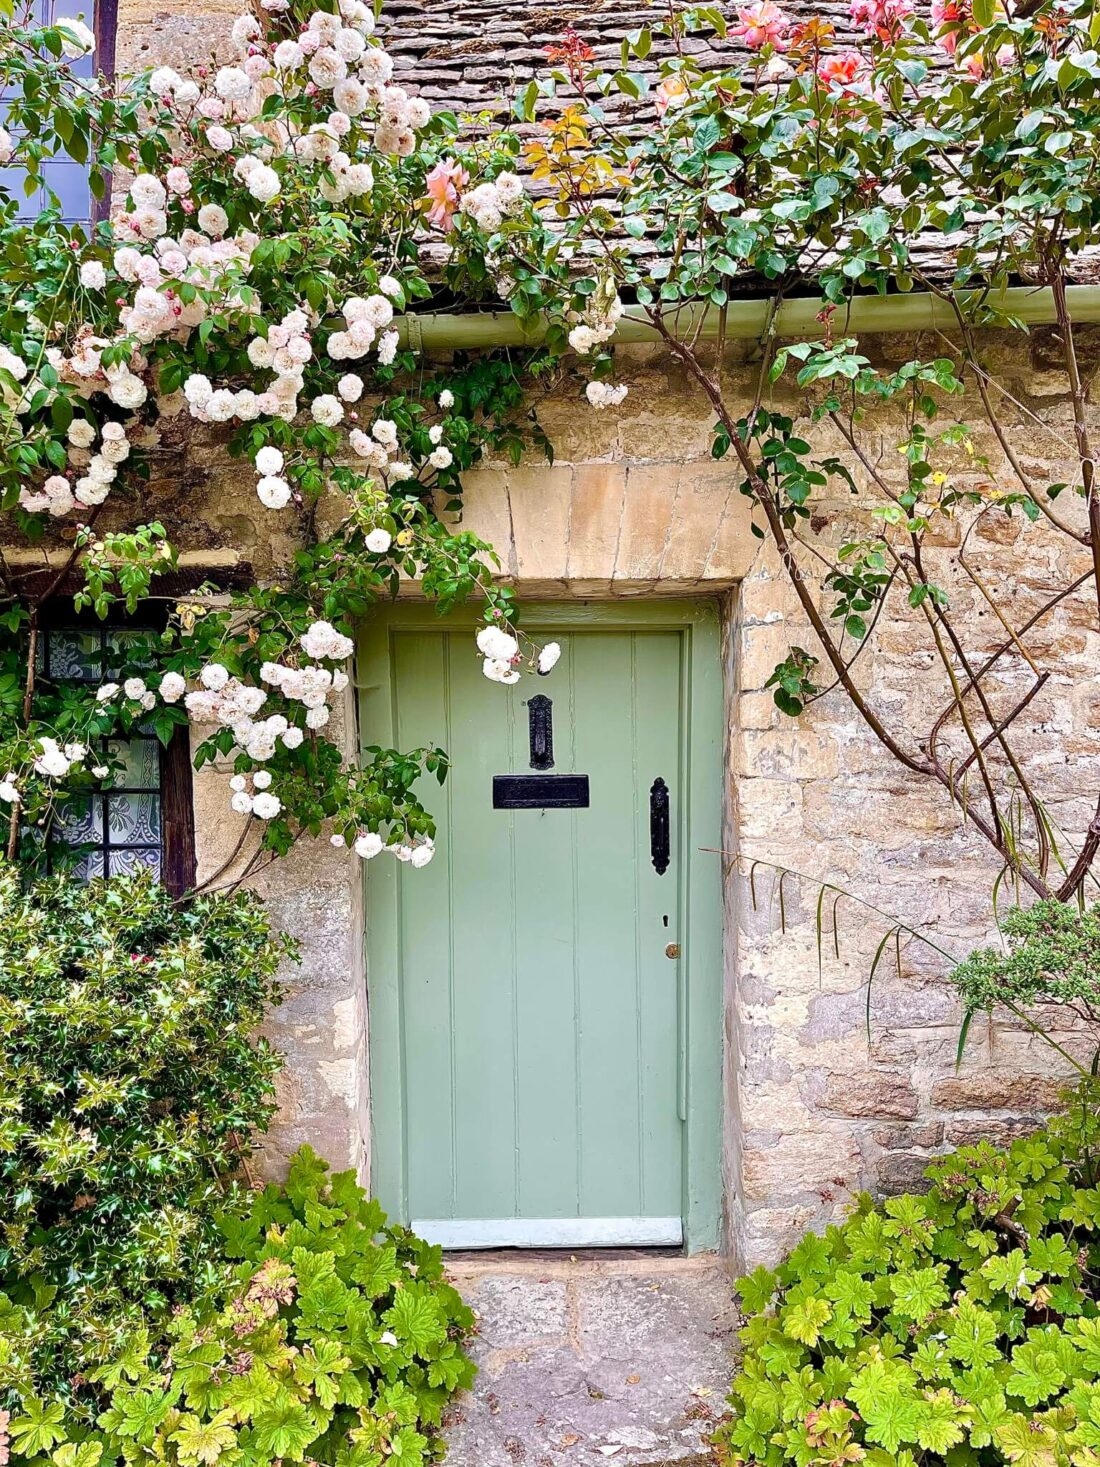 Limestone cottage with green door surrounded by pink roses
Most Beautiful Cotswolds Villages